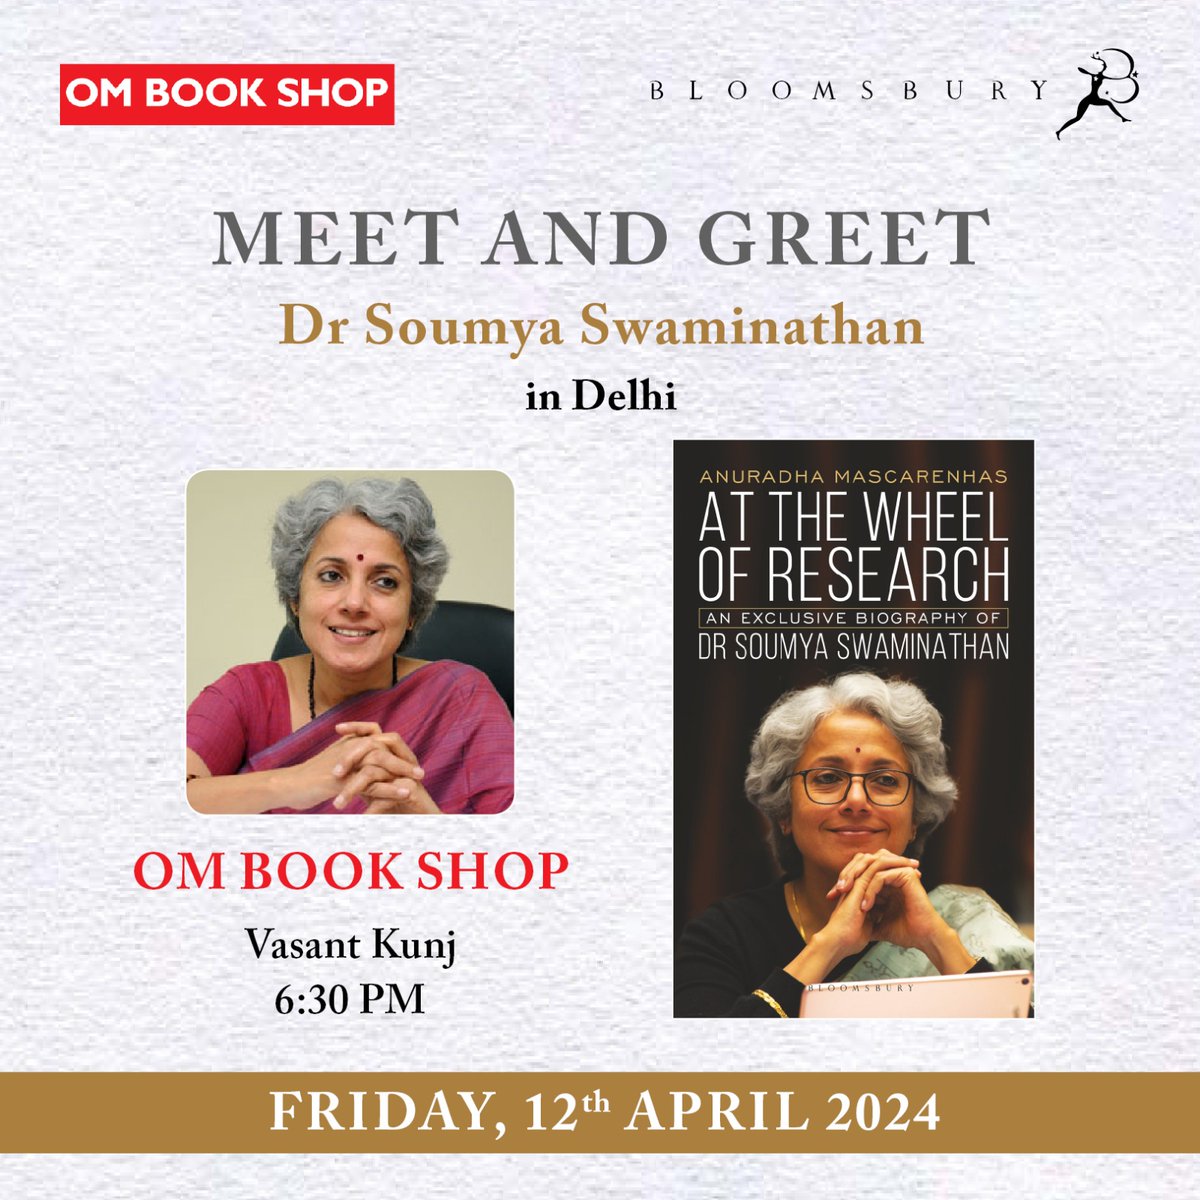 Readers in Delhi, meet Dr. Soumya Swaminathan this Friday at @Ombookshops in Vasant Kunj at 6:30 pm where she will be signing copies of #AtTheWheelOfResearch. @runaanu